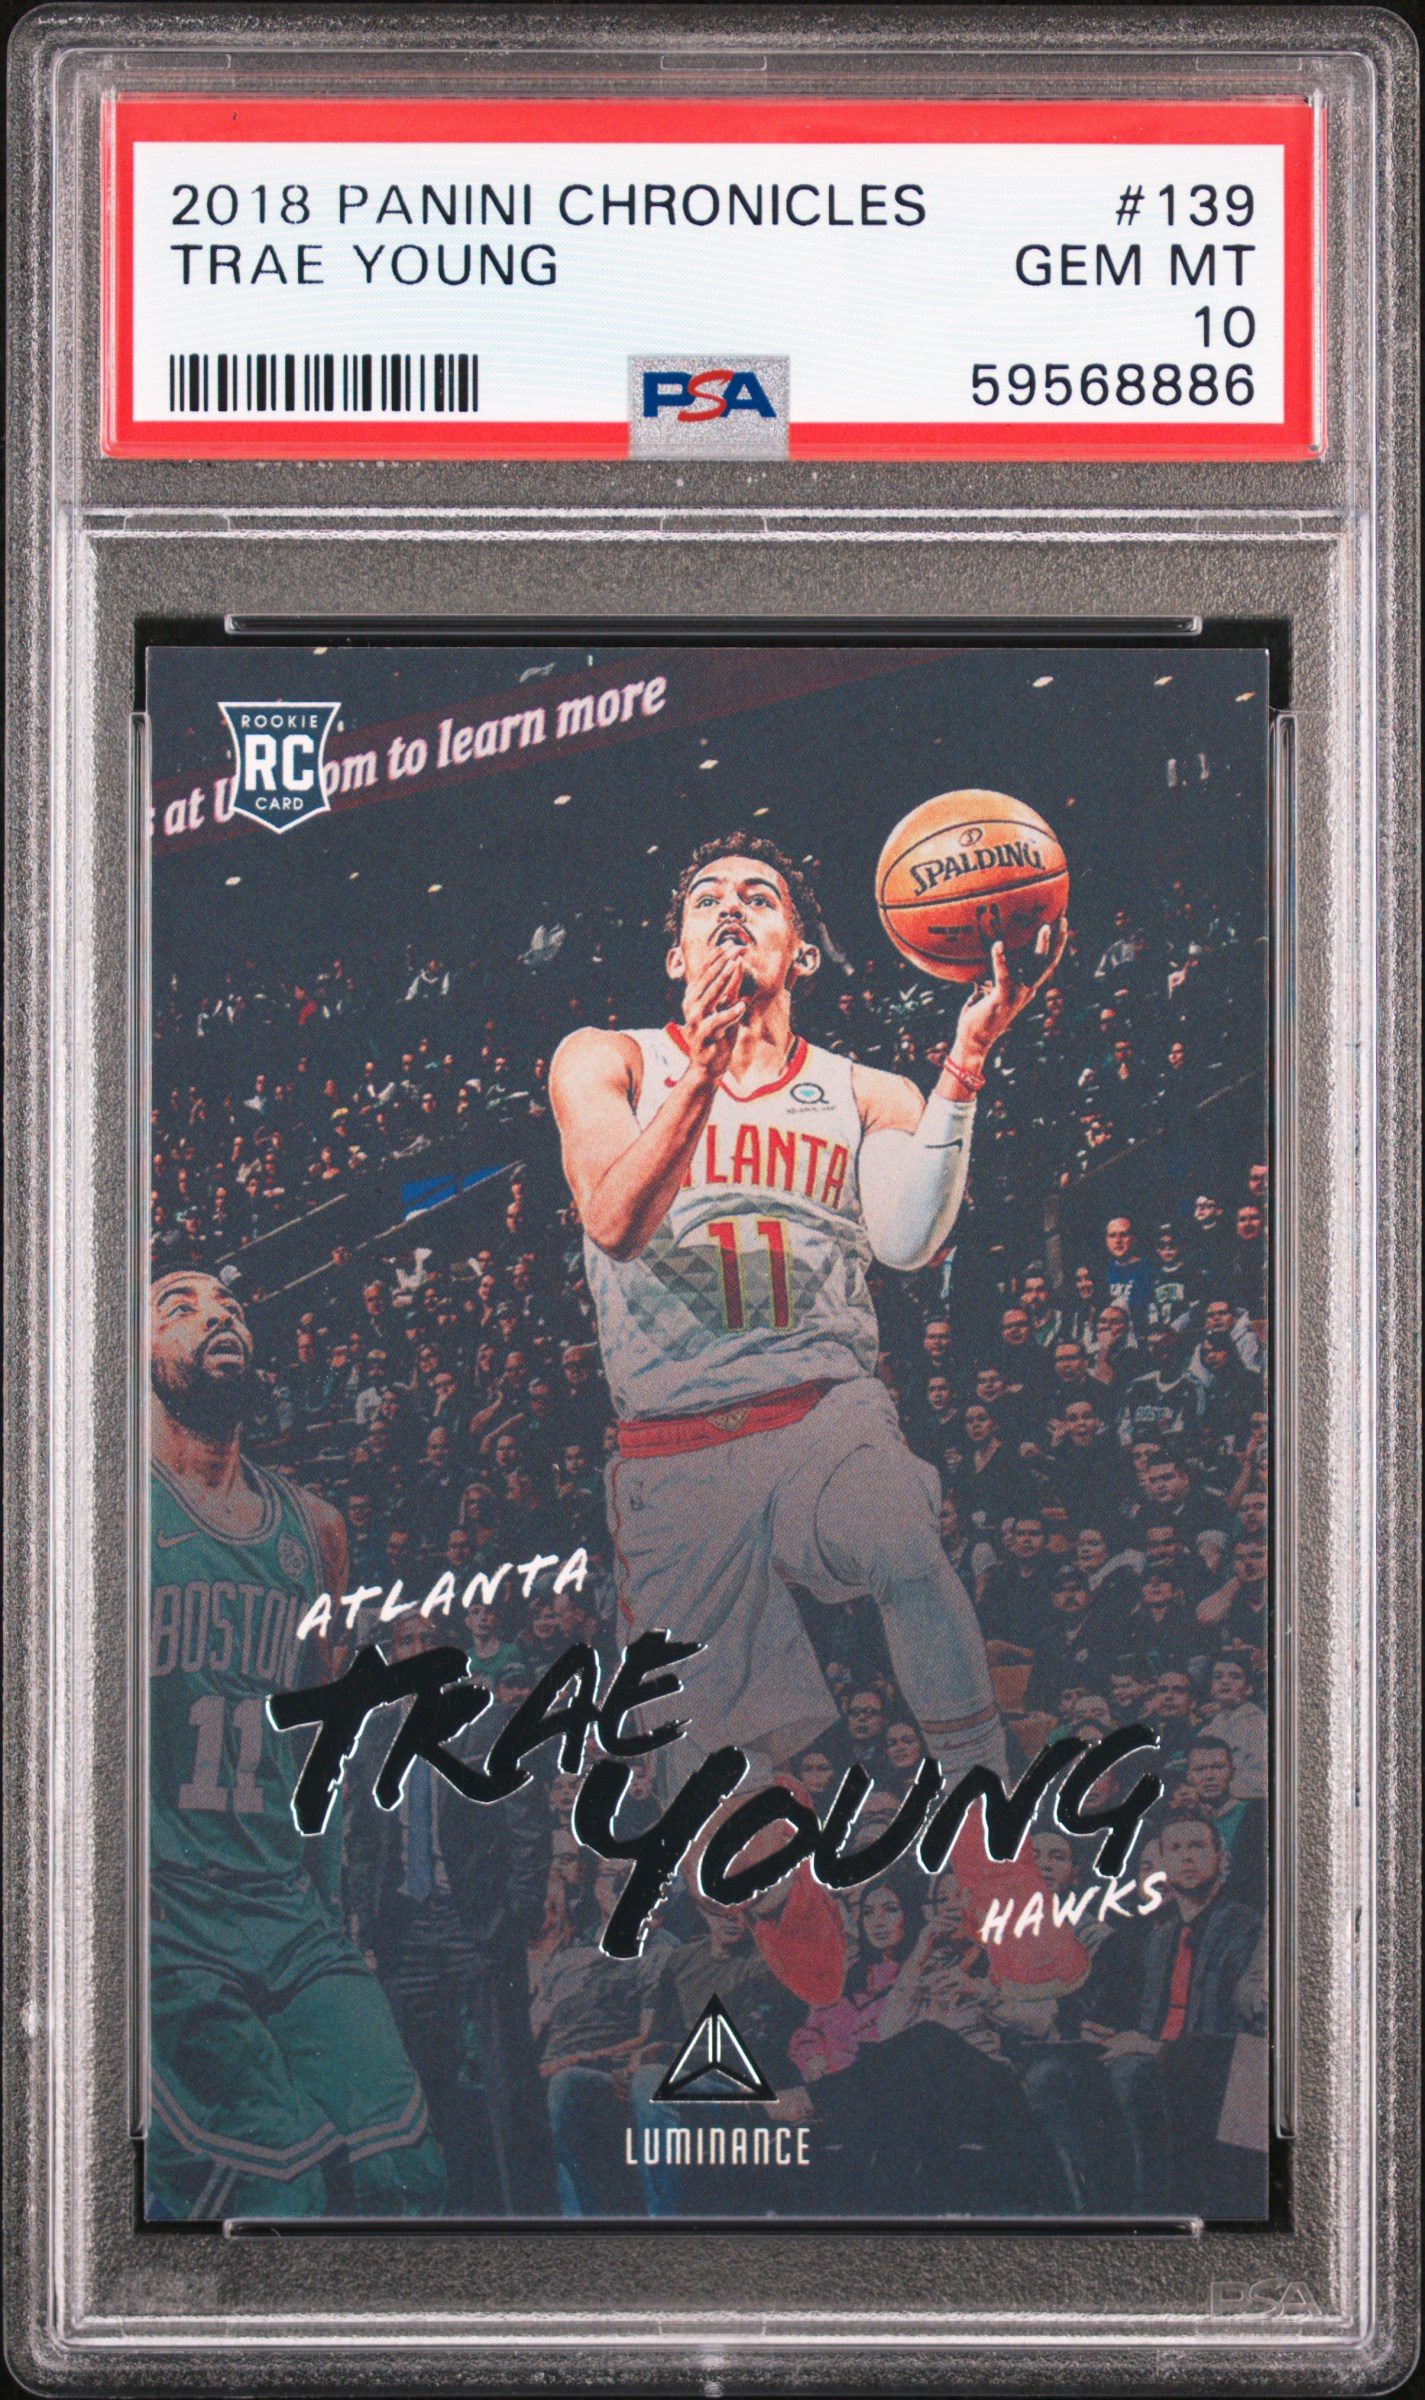 2018 Panini Chronicles #139 Trae Young Rookie Card – PSA GEM MT 10